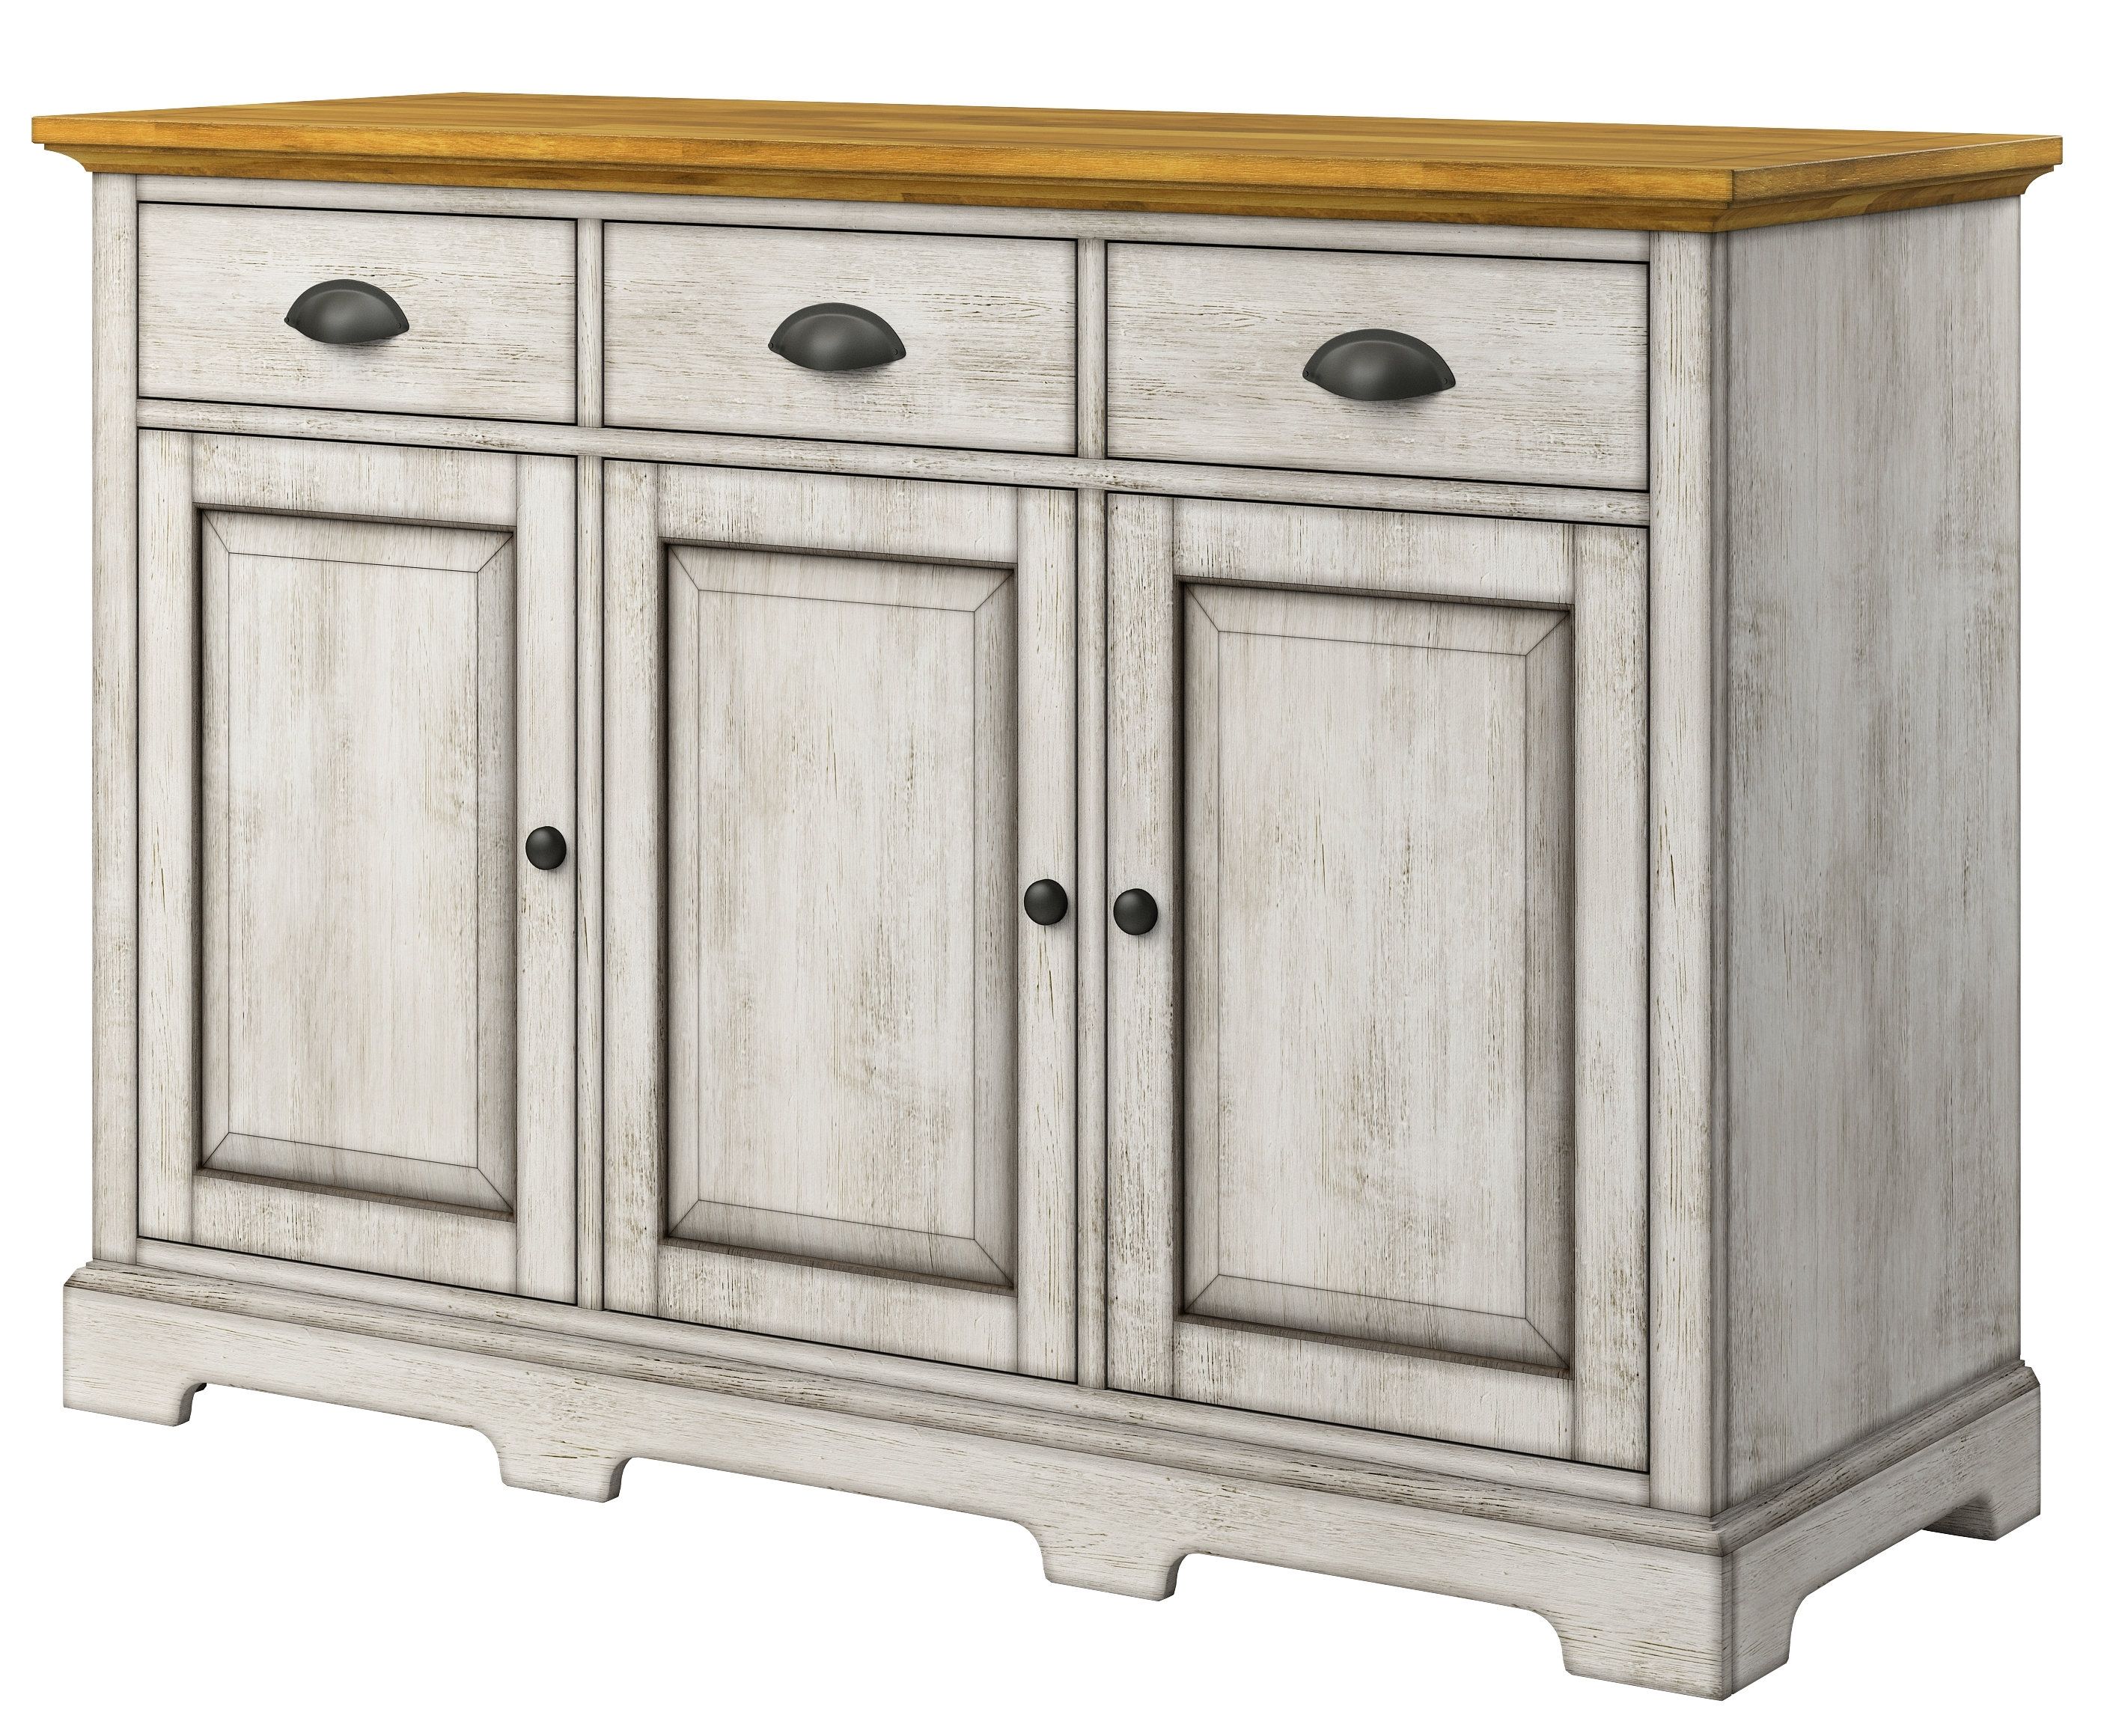 Antique White Server | Wayfair Within Lockwood Sideboards (View 21 of 30)